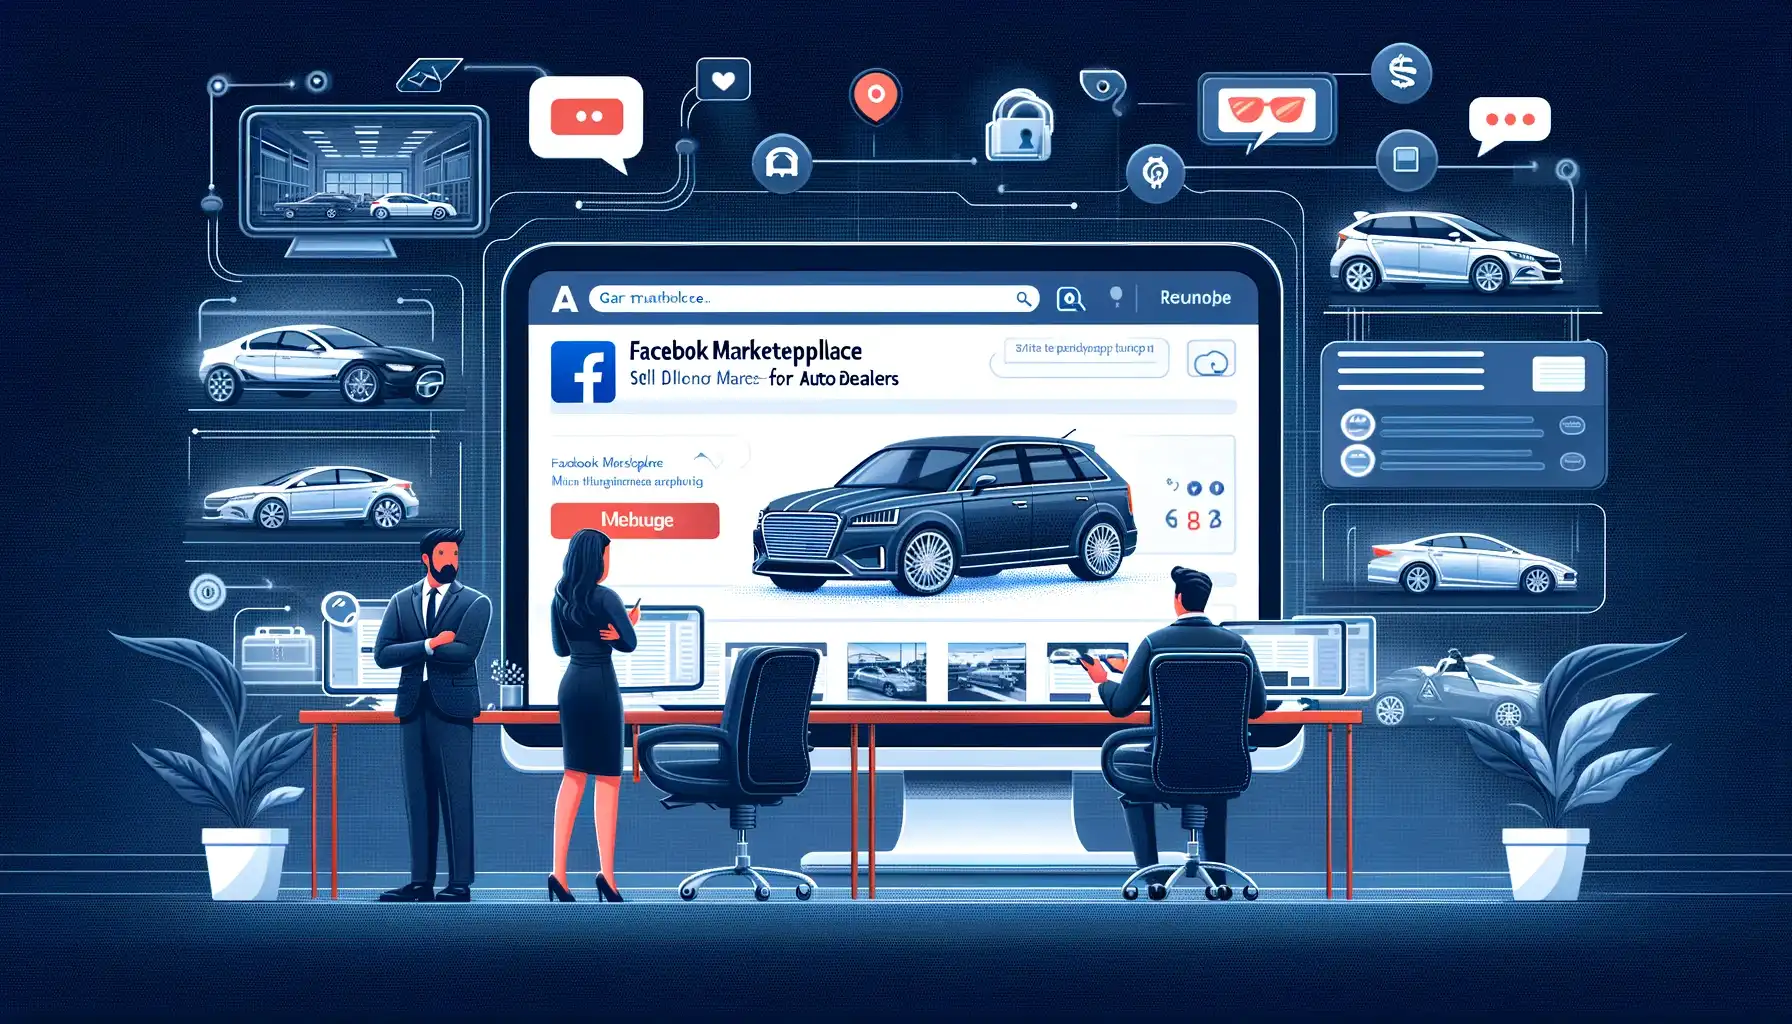 How to Sell Used Cars on Facebook Marketplace Image